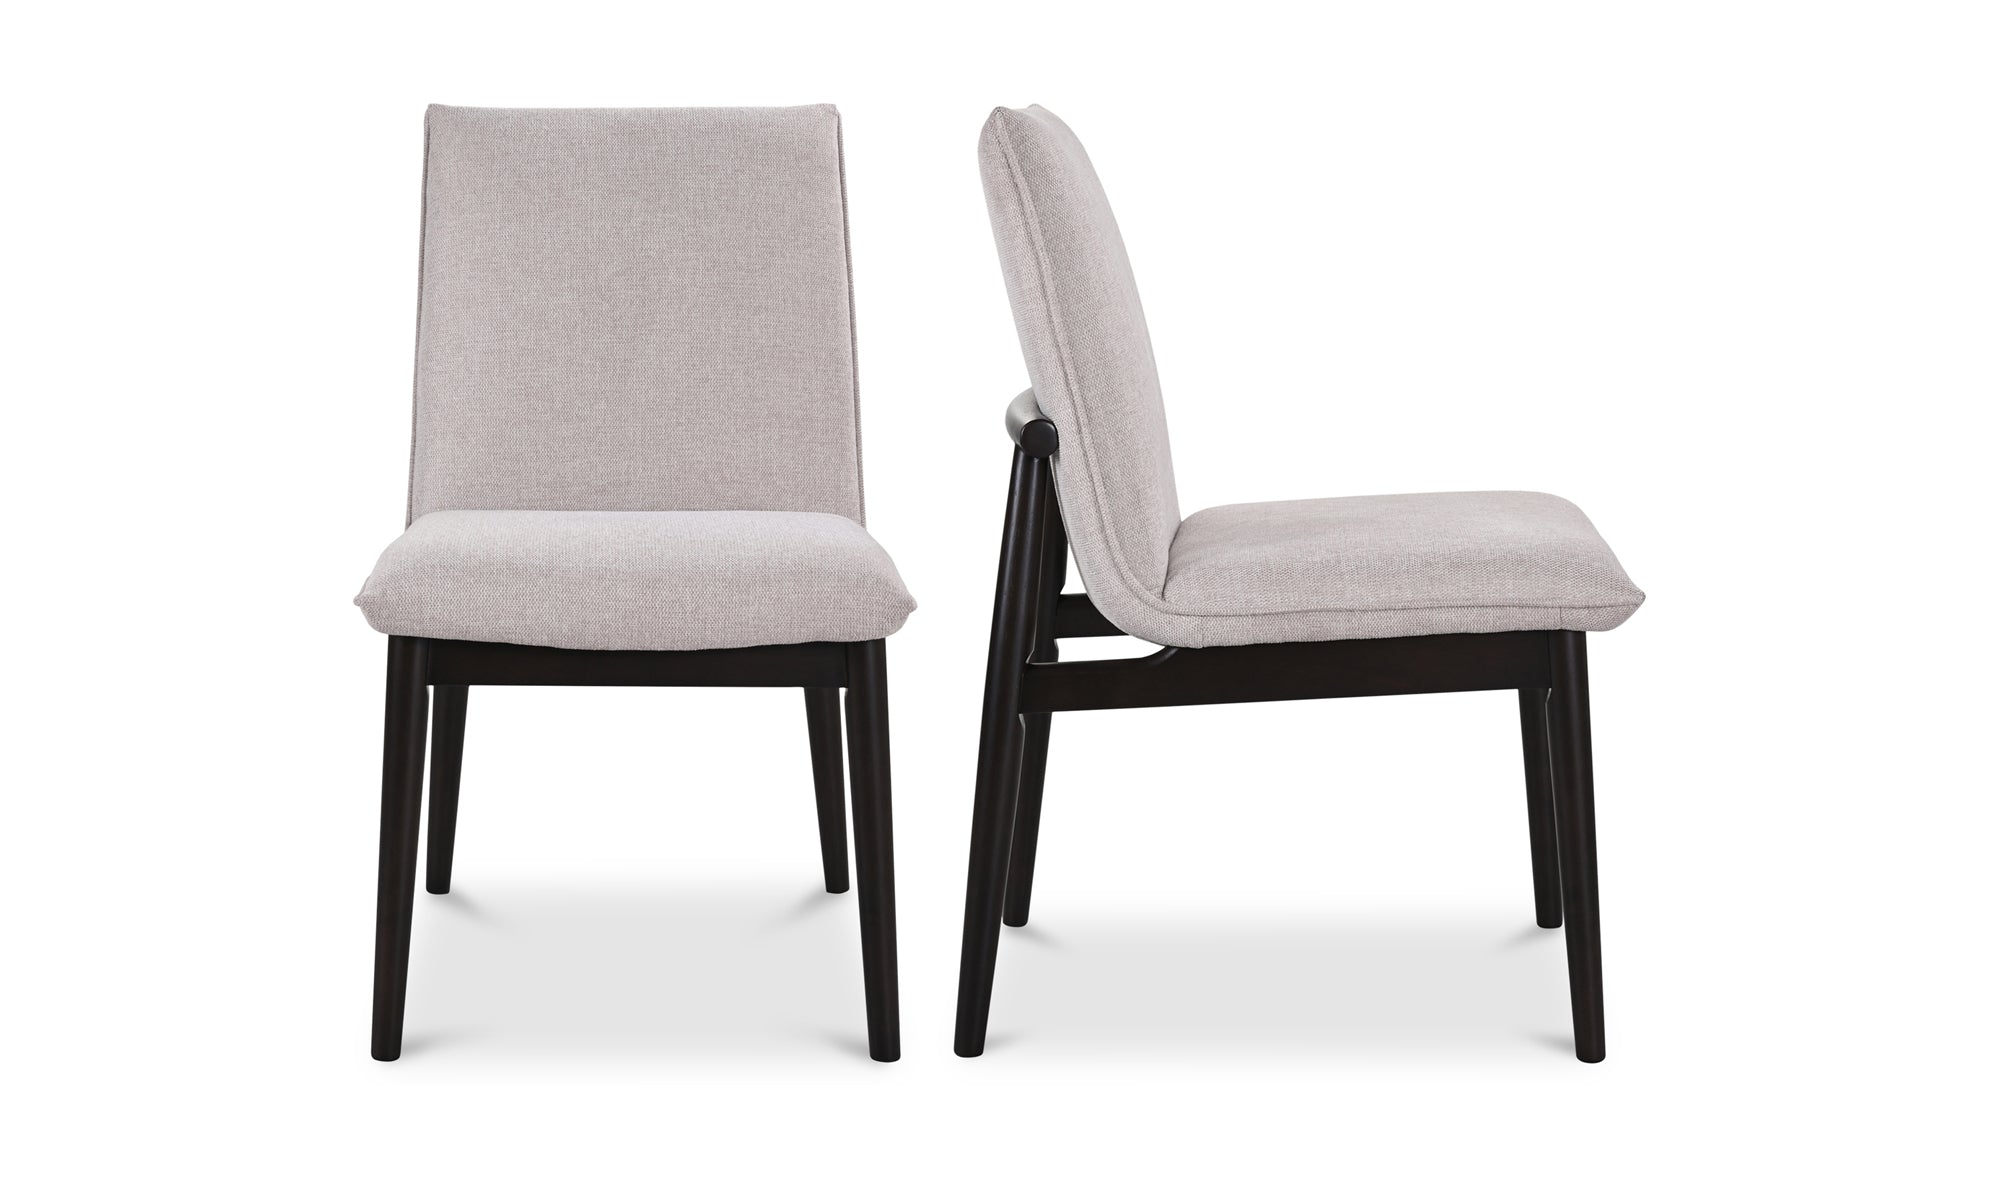 Charlie Dining Chair in Beige